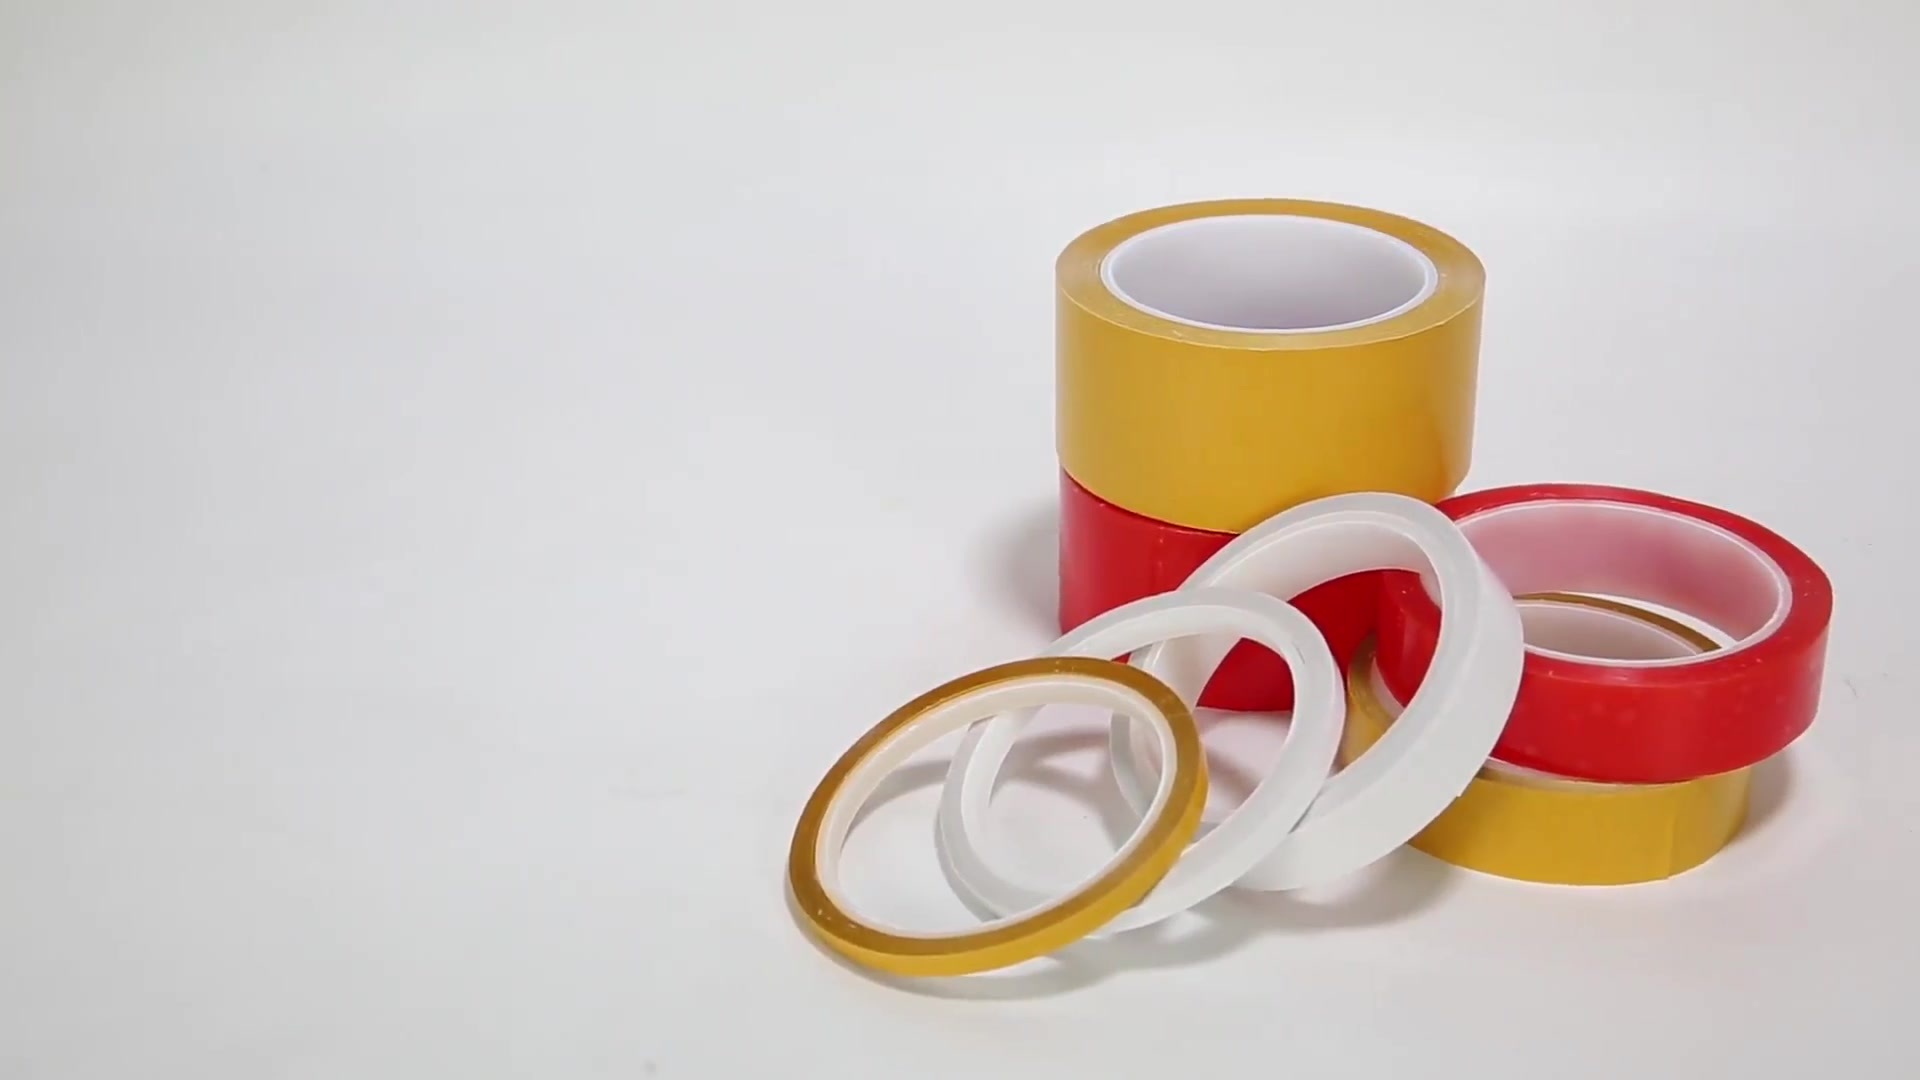 Crown 7972/6972 Transperent Pet Double Sided Tape with Yellow Glassine  Release Paper - China Pet Tape, Clear Pet Tape